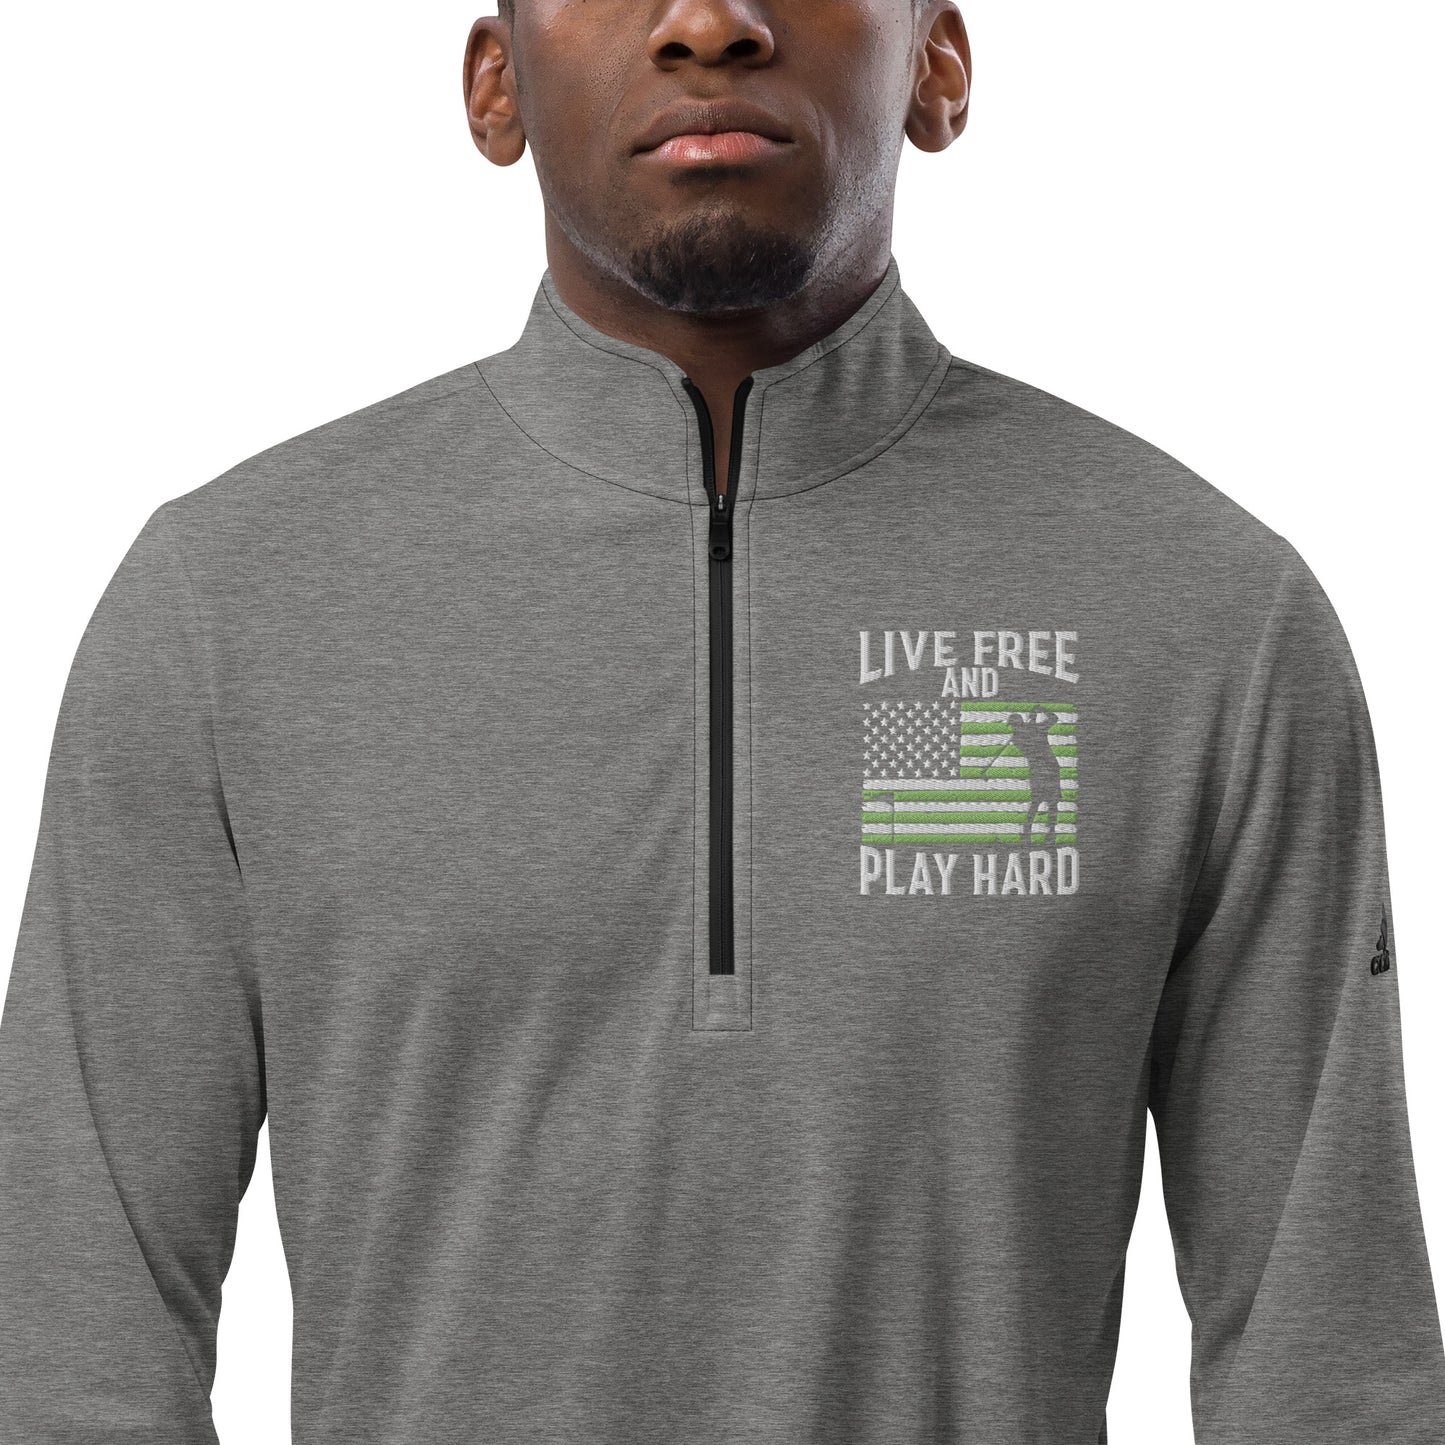 Adidas 'Live Free and Play Hard' 1/4 Zip Golf Pullover (Military Appreciation)